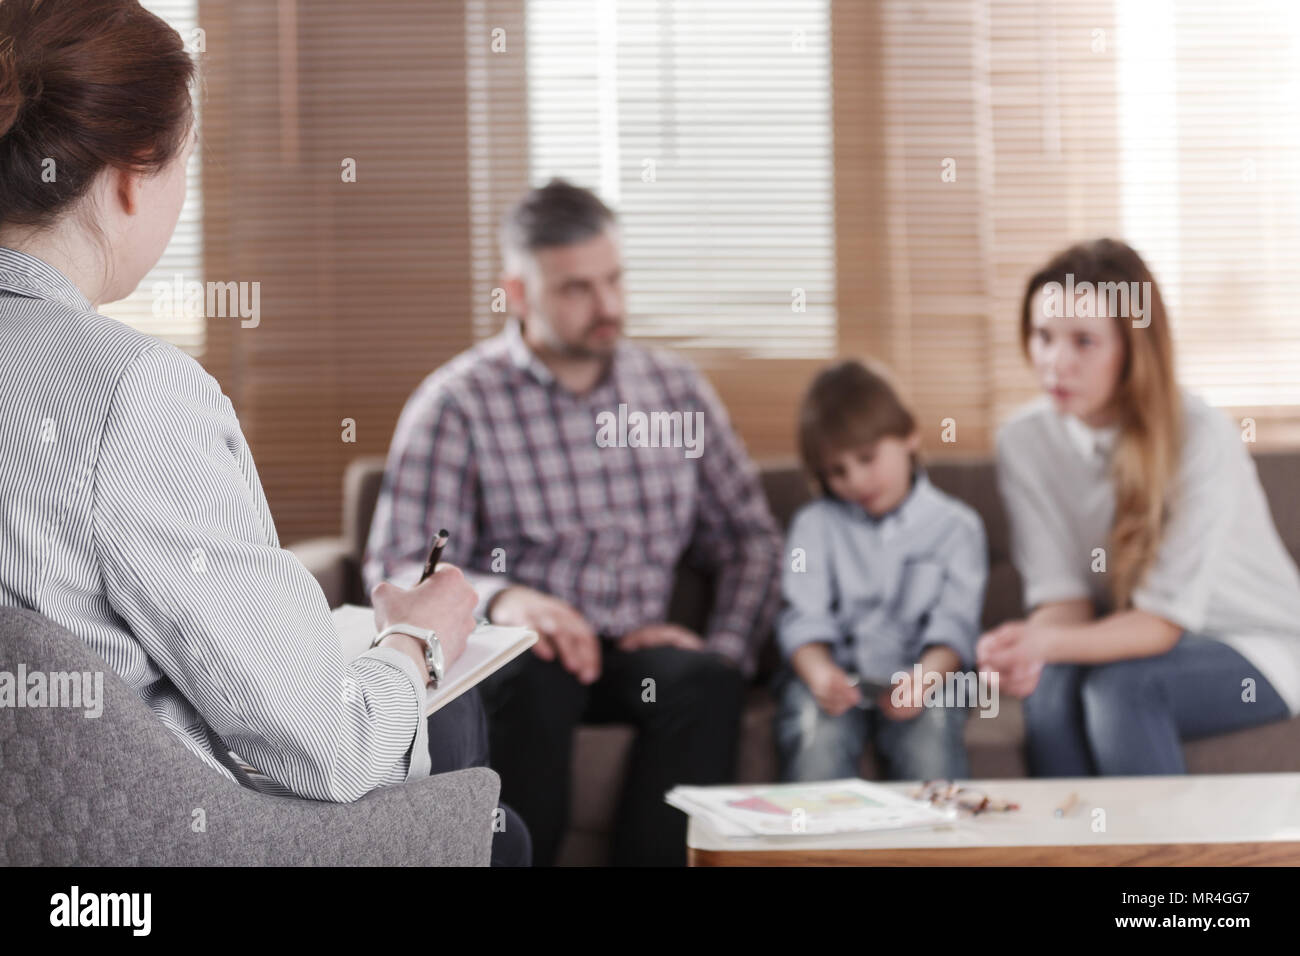 Rear view of female psychologist helping young family with a kid to solve child development problems. Family sitting on a sofa in the blurred backgrou Stock Photo